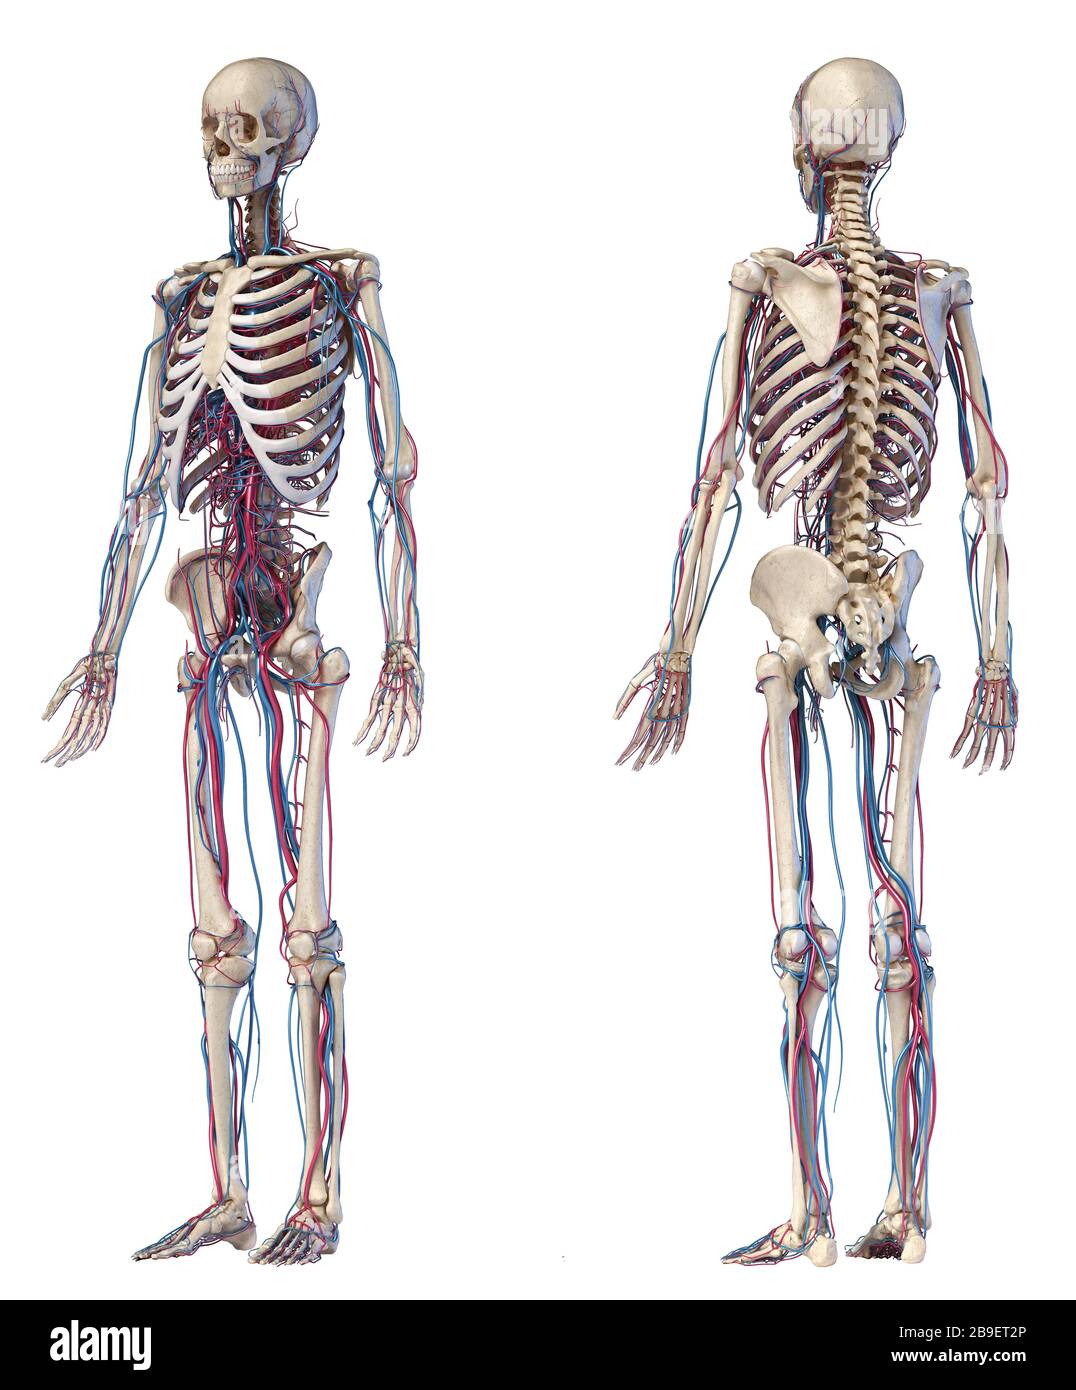 Anatomy of human skeleton with veins and arteries, on white background. Stock Photo